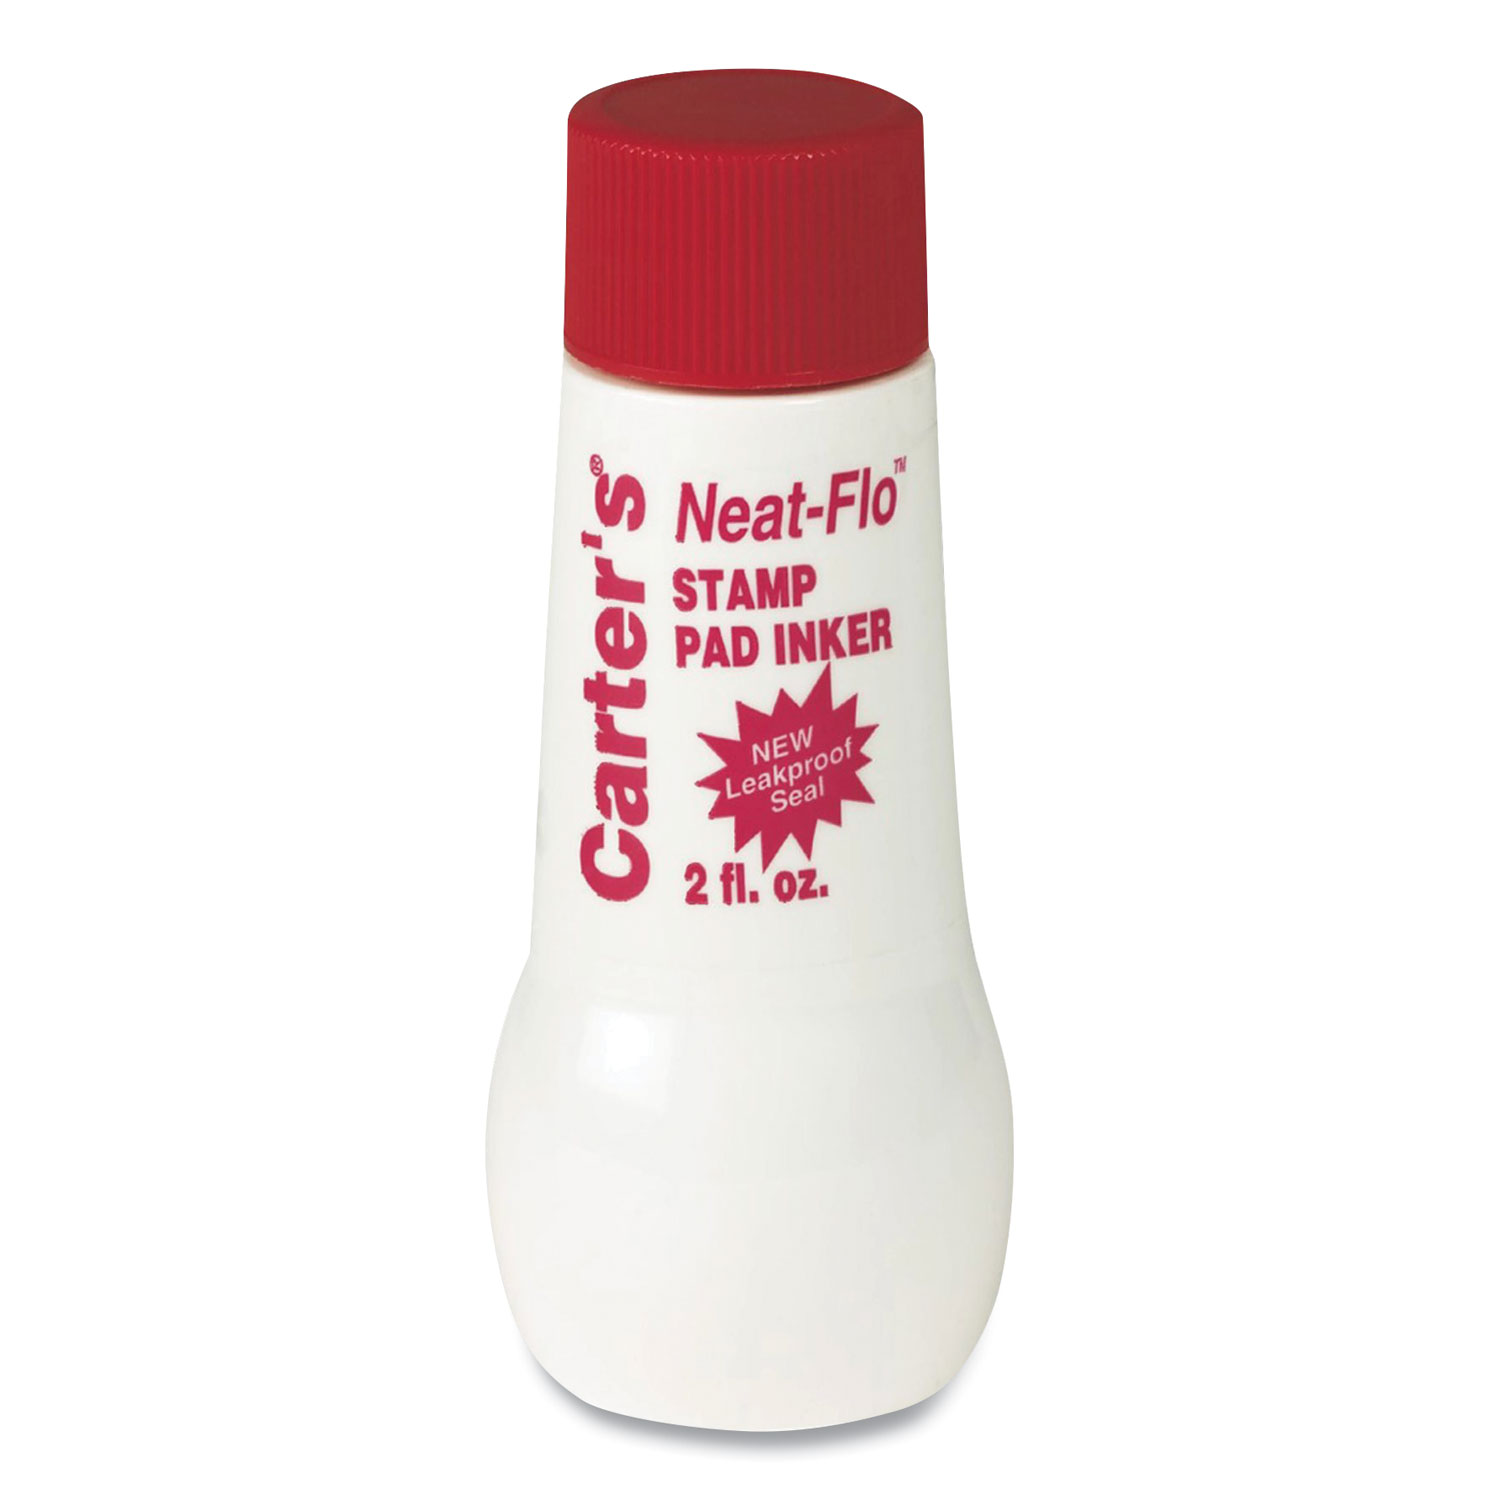  Carter's 21447 Neat-Flo Stamp Pad Inker, 2 oz, Red (AVE166801) 